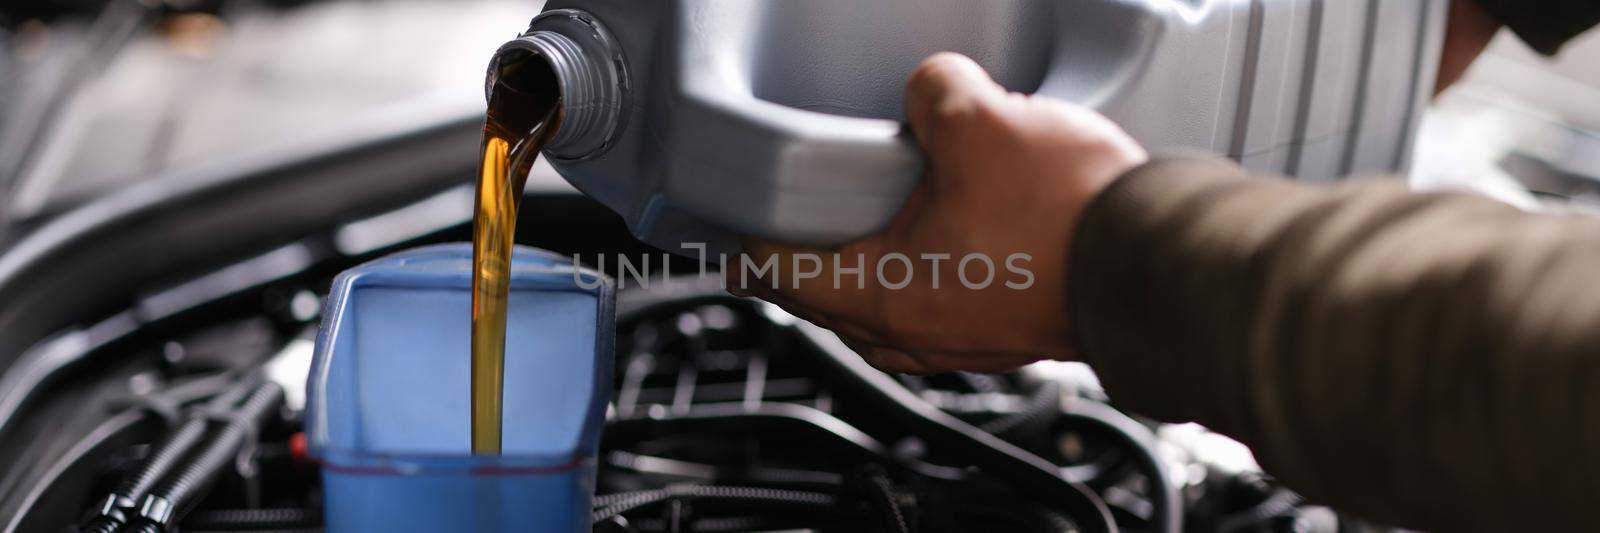 Locksmith mechanic pours engine oil into plastic container on motor engine by kuprevich